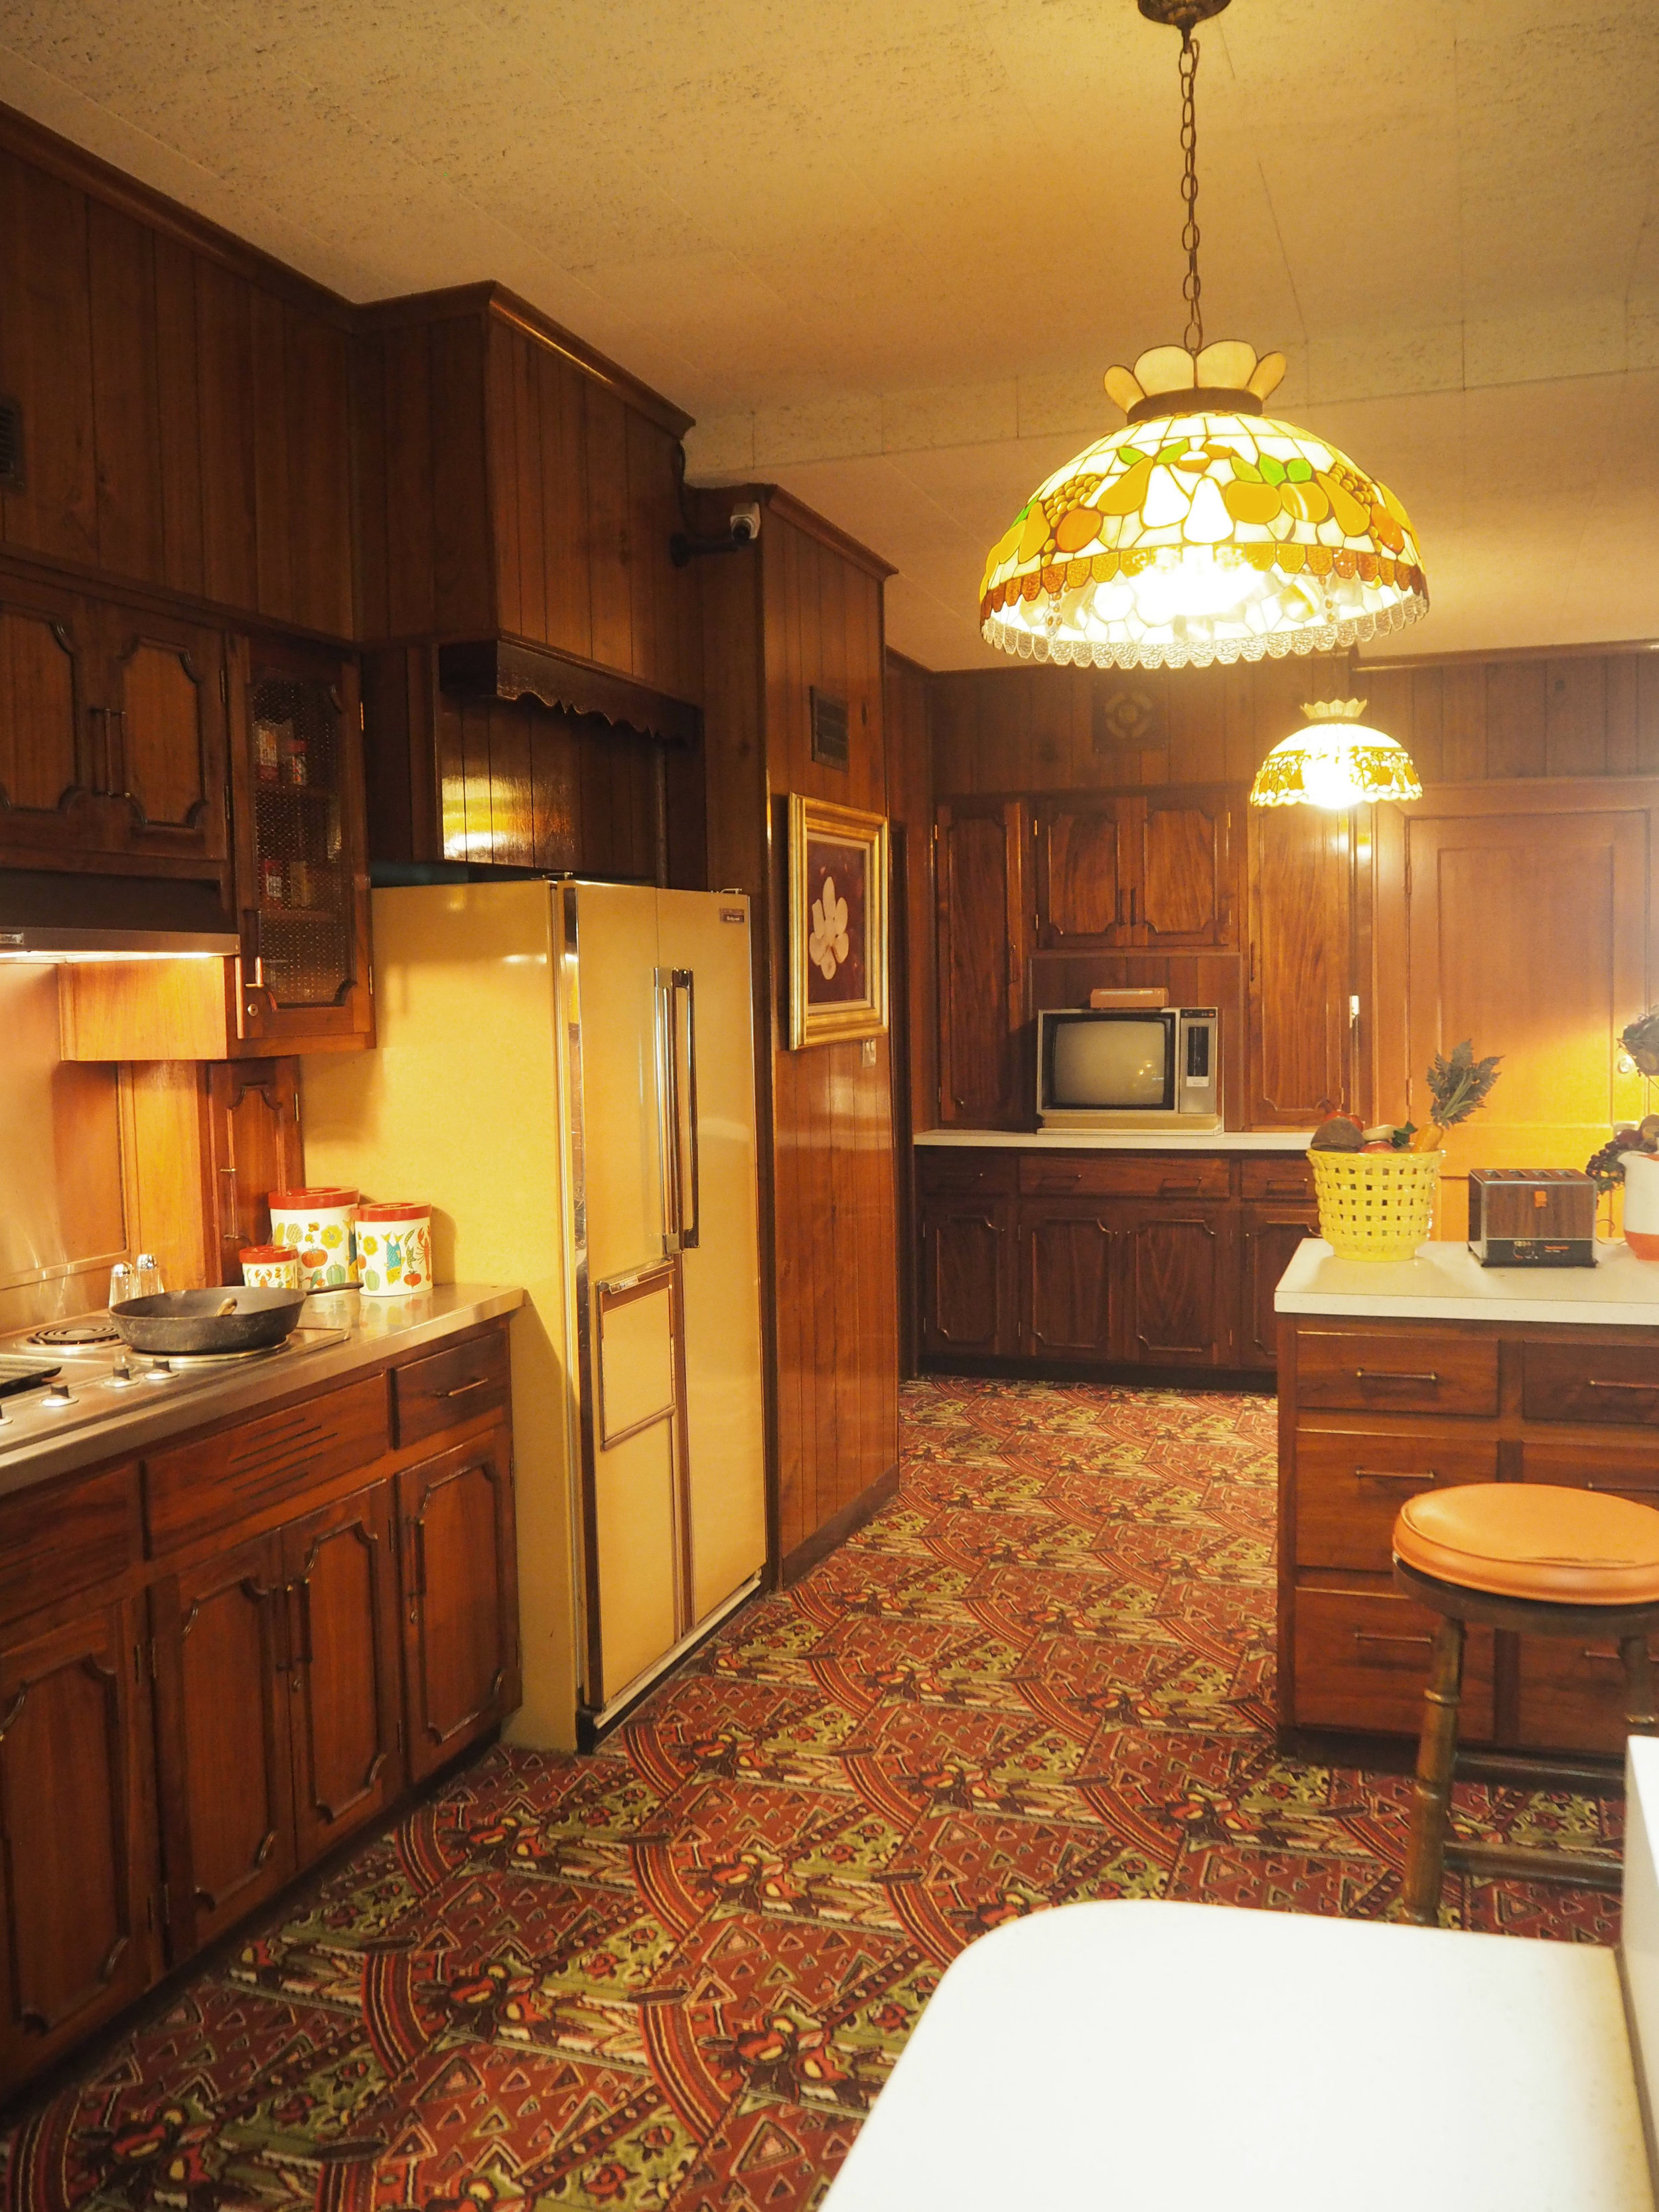  Elvis Presley's Graceland kitchen. To see more pics, click on the photo. 